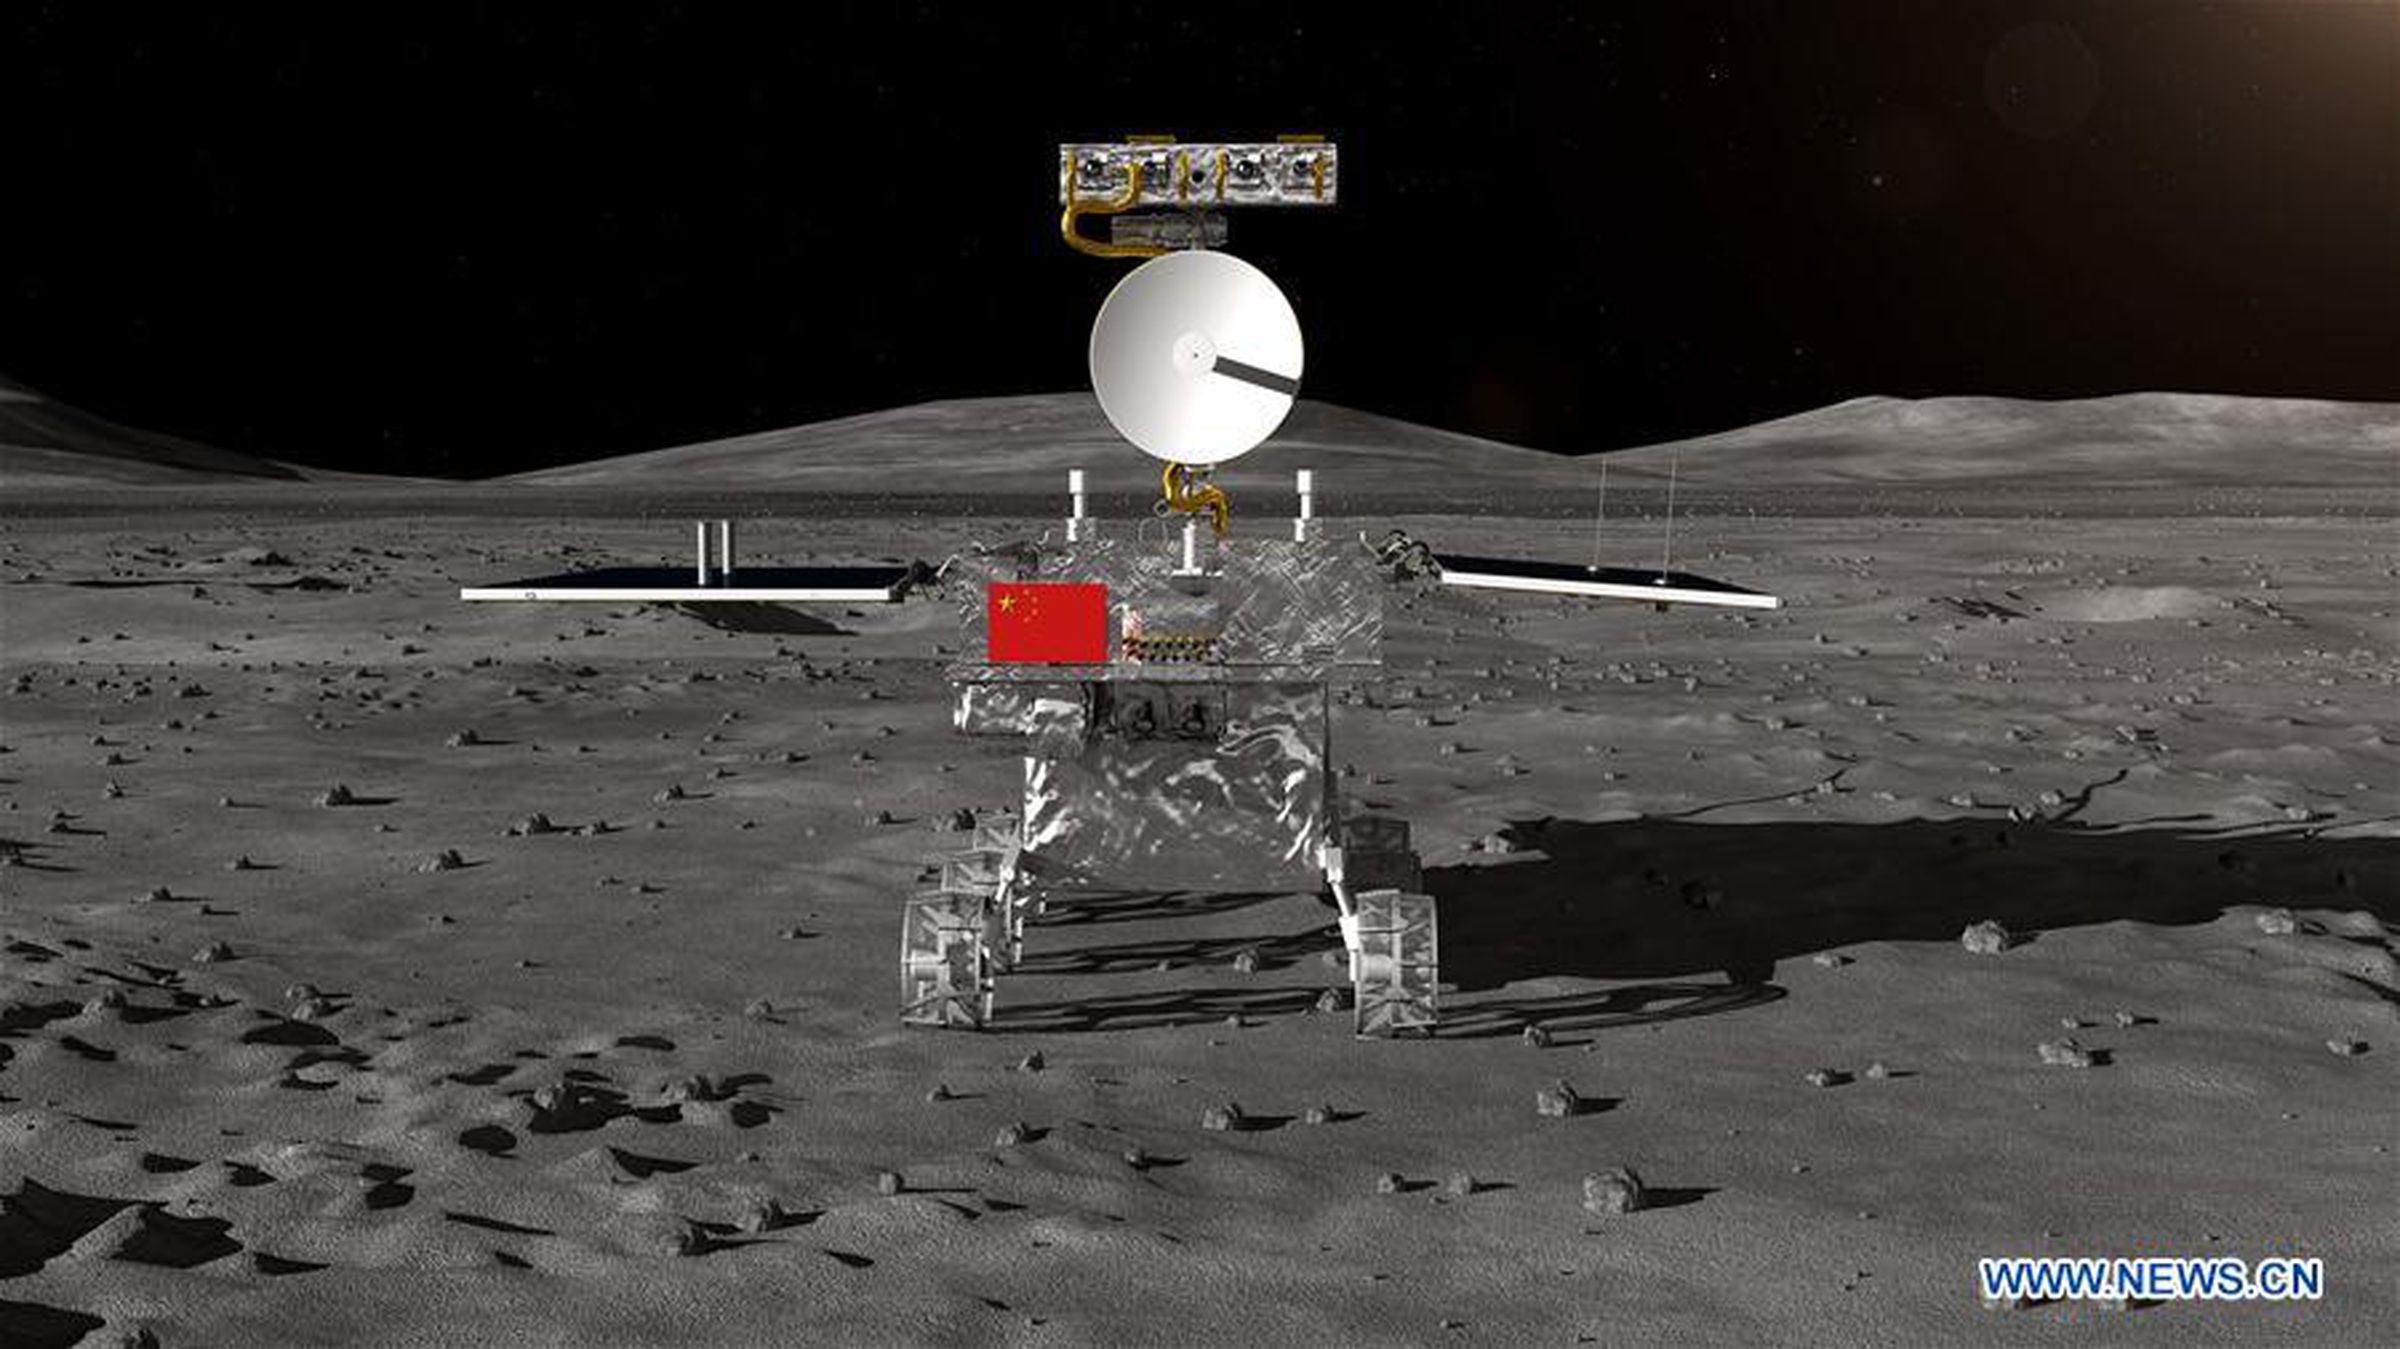 A rendering of the Chang’e-4 rover